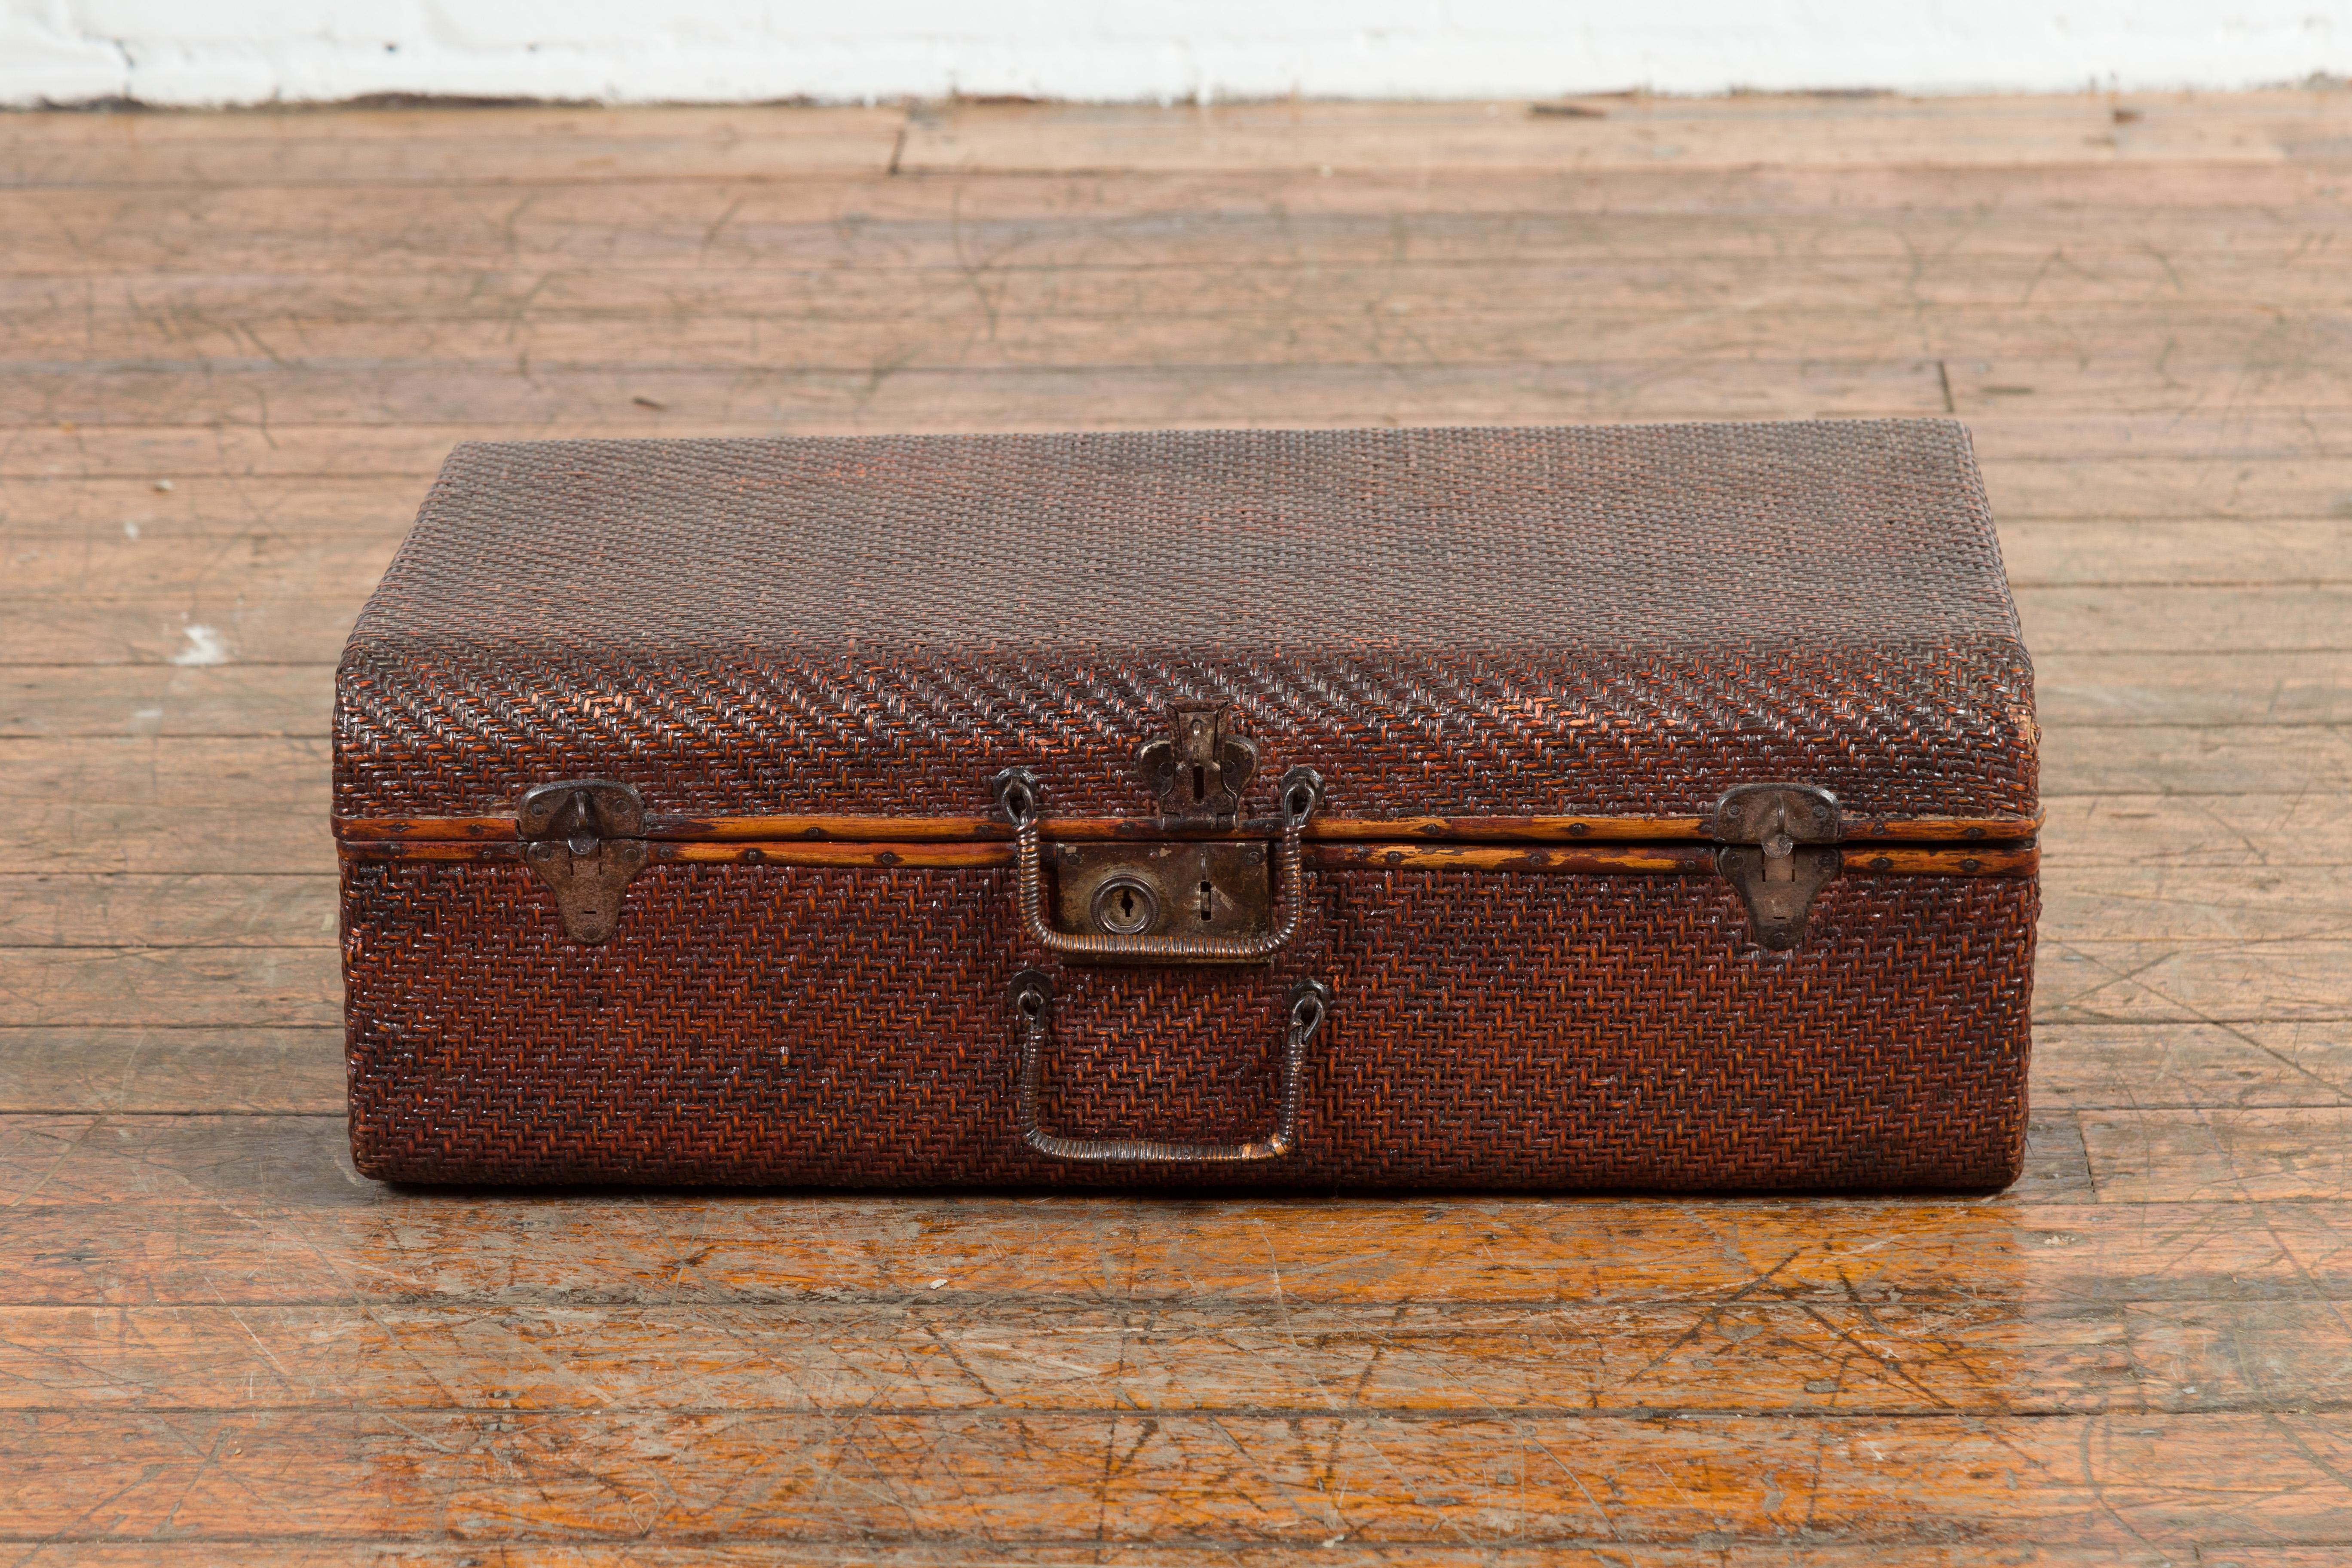 An antique Thai rattan over wood carrying case from the 19th century, with scroll-painted interior. Created in Thailand during the 19th century, this antique carrying case features a rattan bound exterior accented with metal hardware. The lid opens